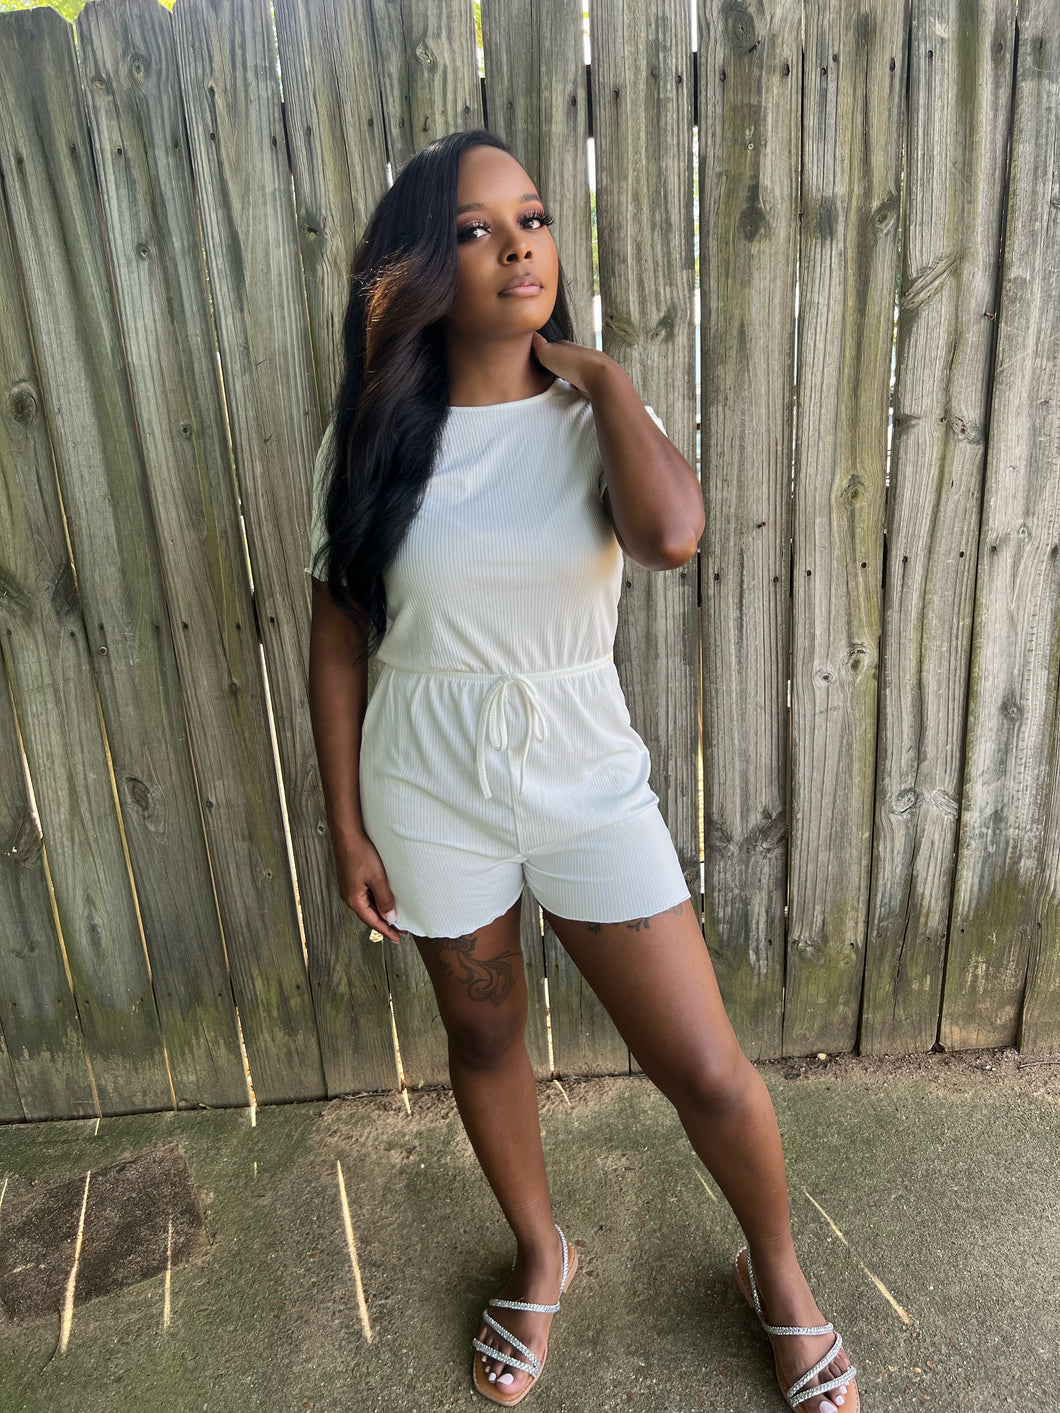 Keep it simple Basic and Cute “Romper”